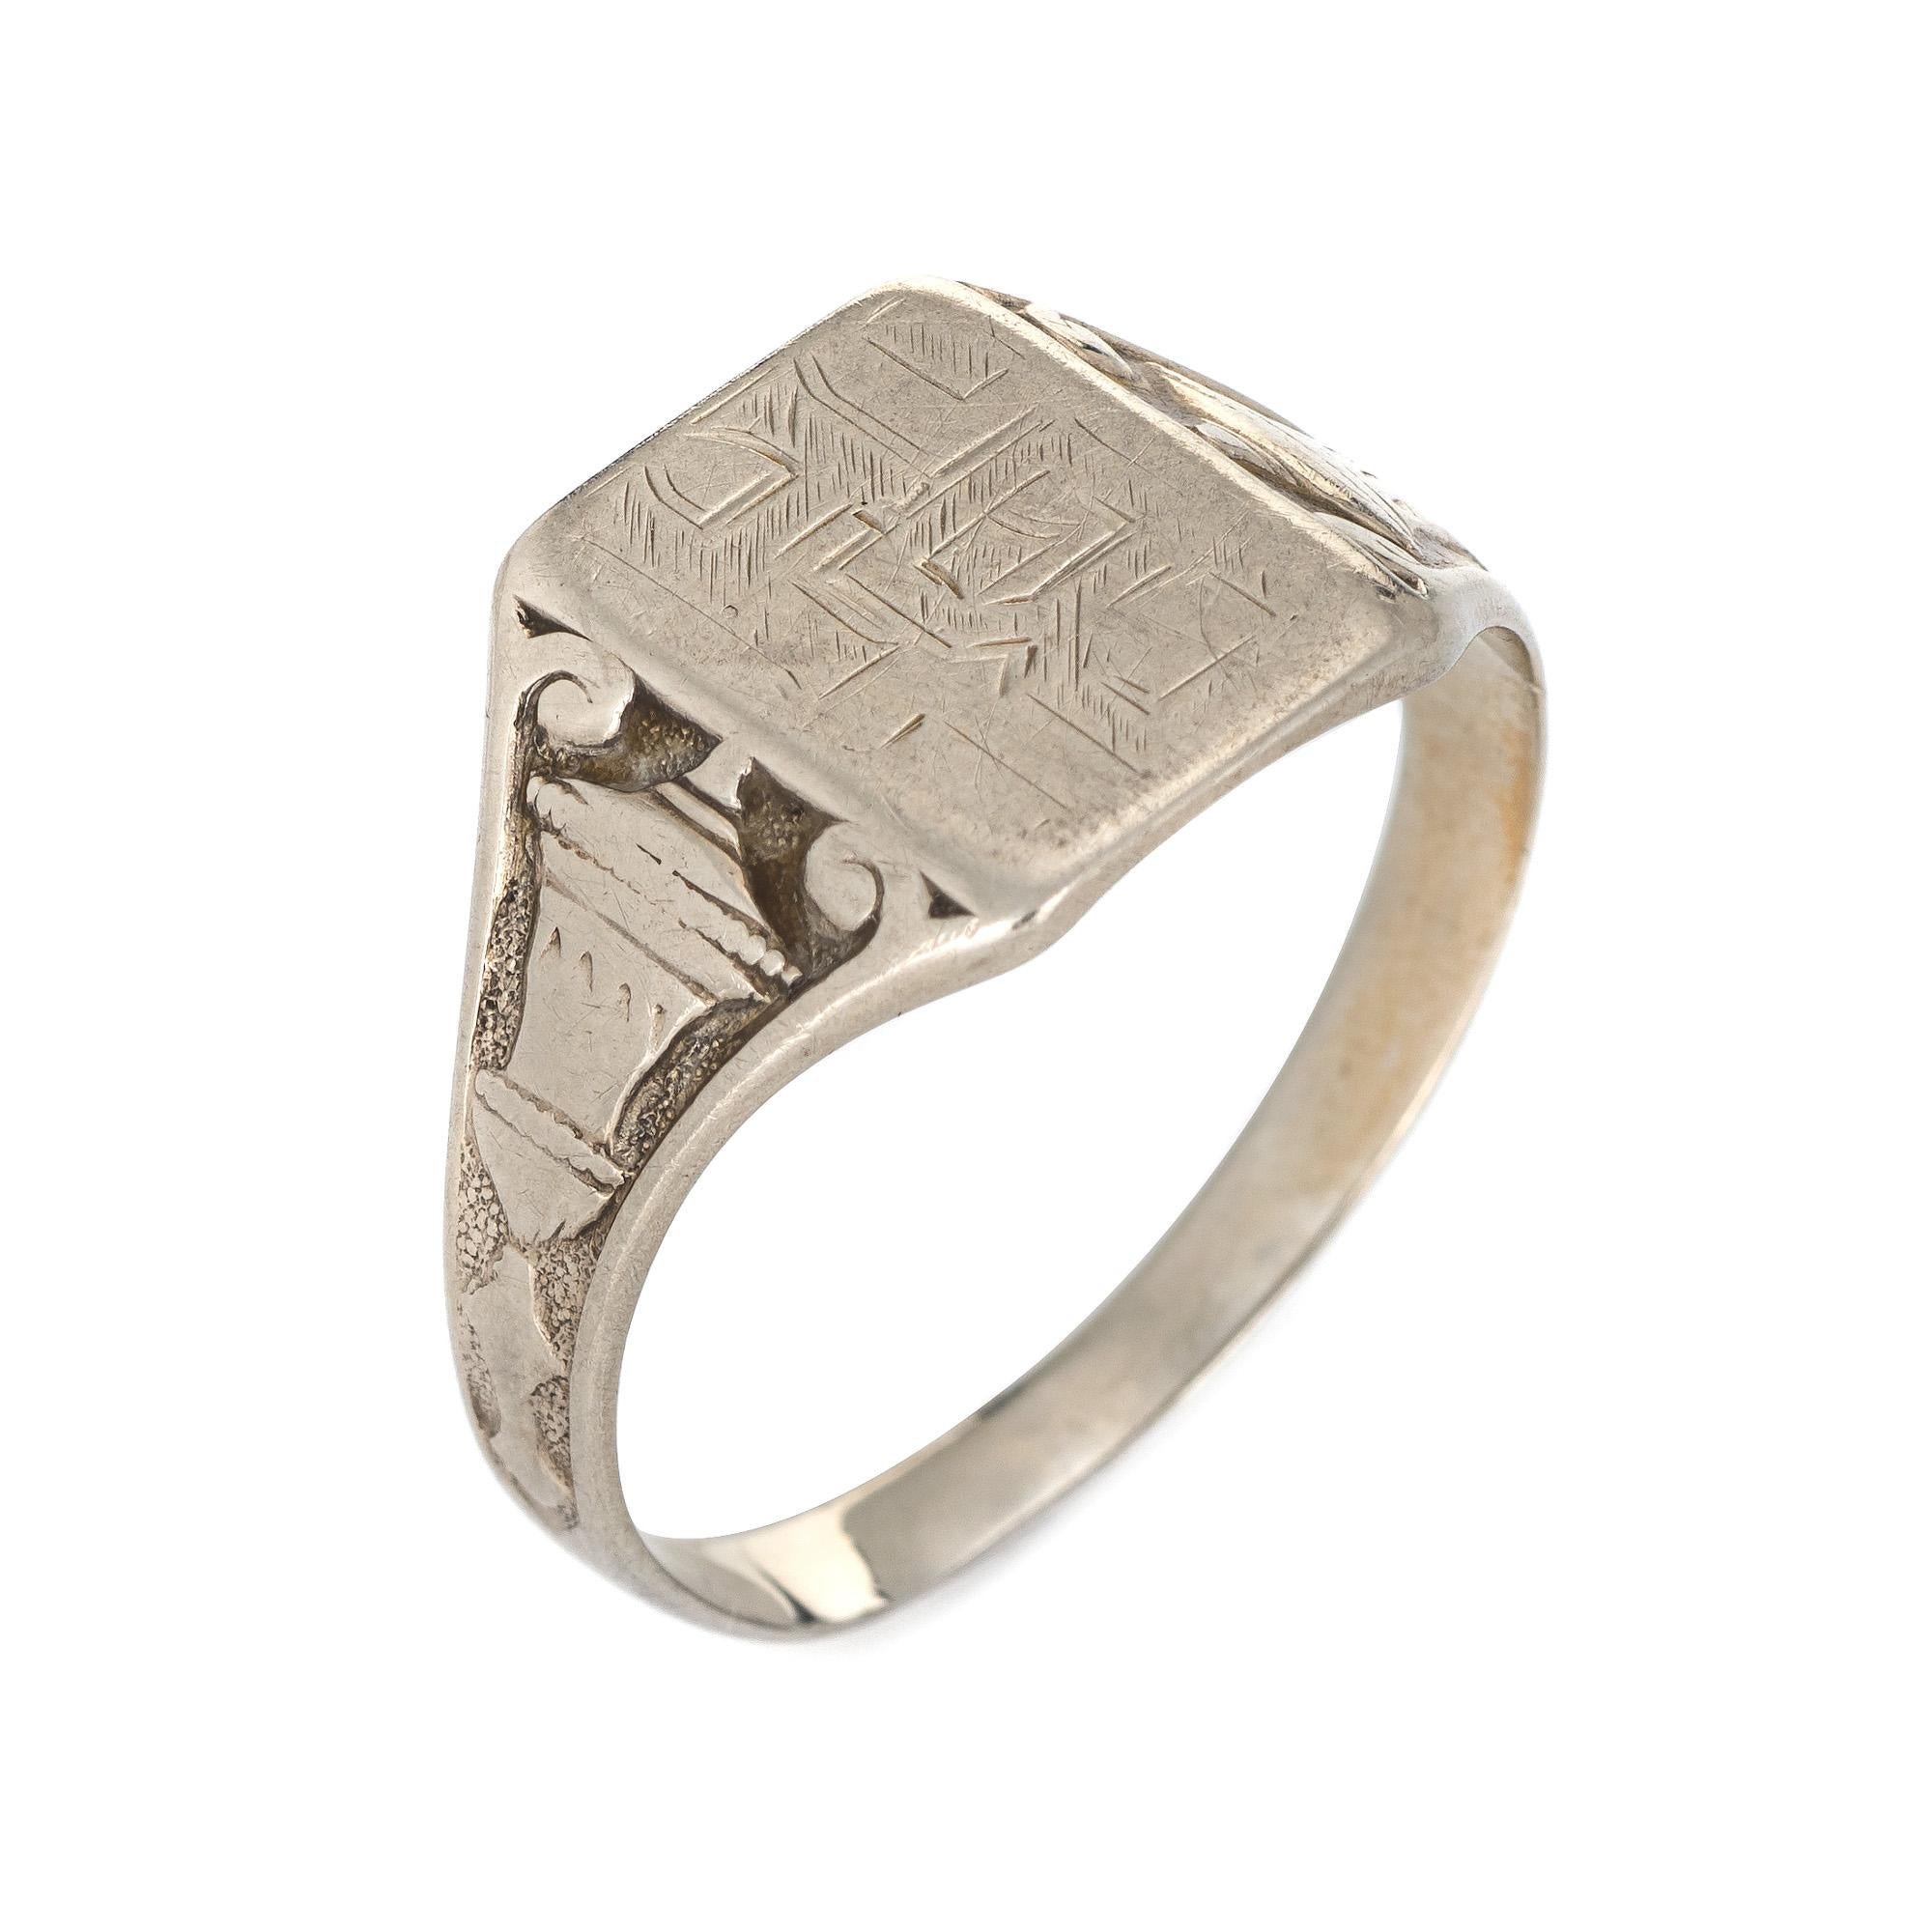 Finely detailed vintage Art Deco era signet ring (circa 1920s to 1930s) crafted in 14 karat white gold. 

The signet ring features a square mount (with an engraving) yet unfortunately due to wear we are unable to decipher the letters. The side